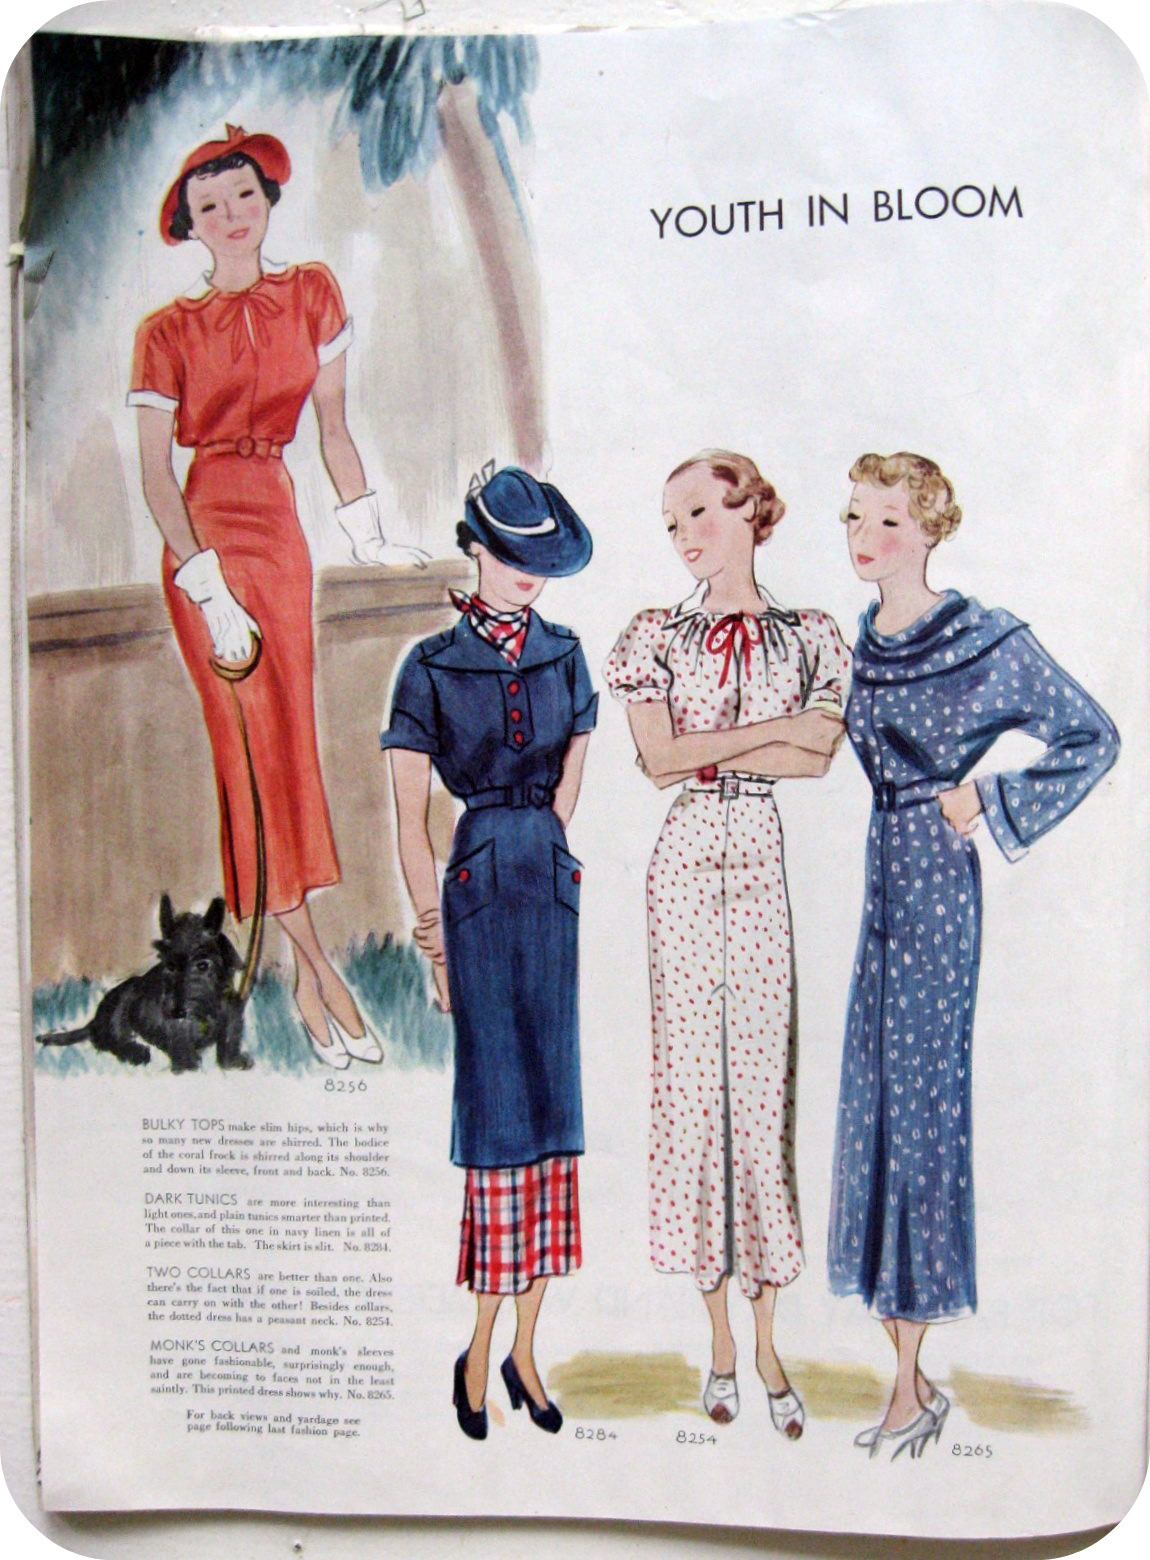 small earth vintage fashions from McCall's, May 1935